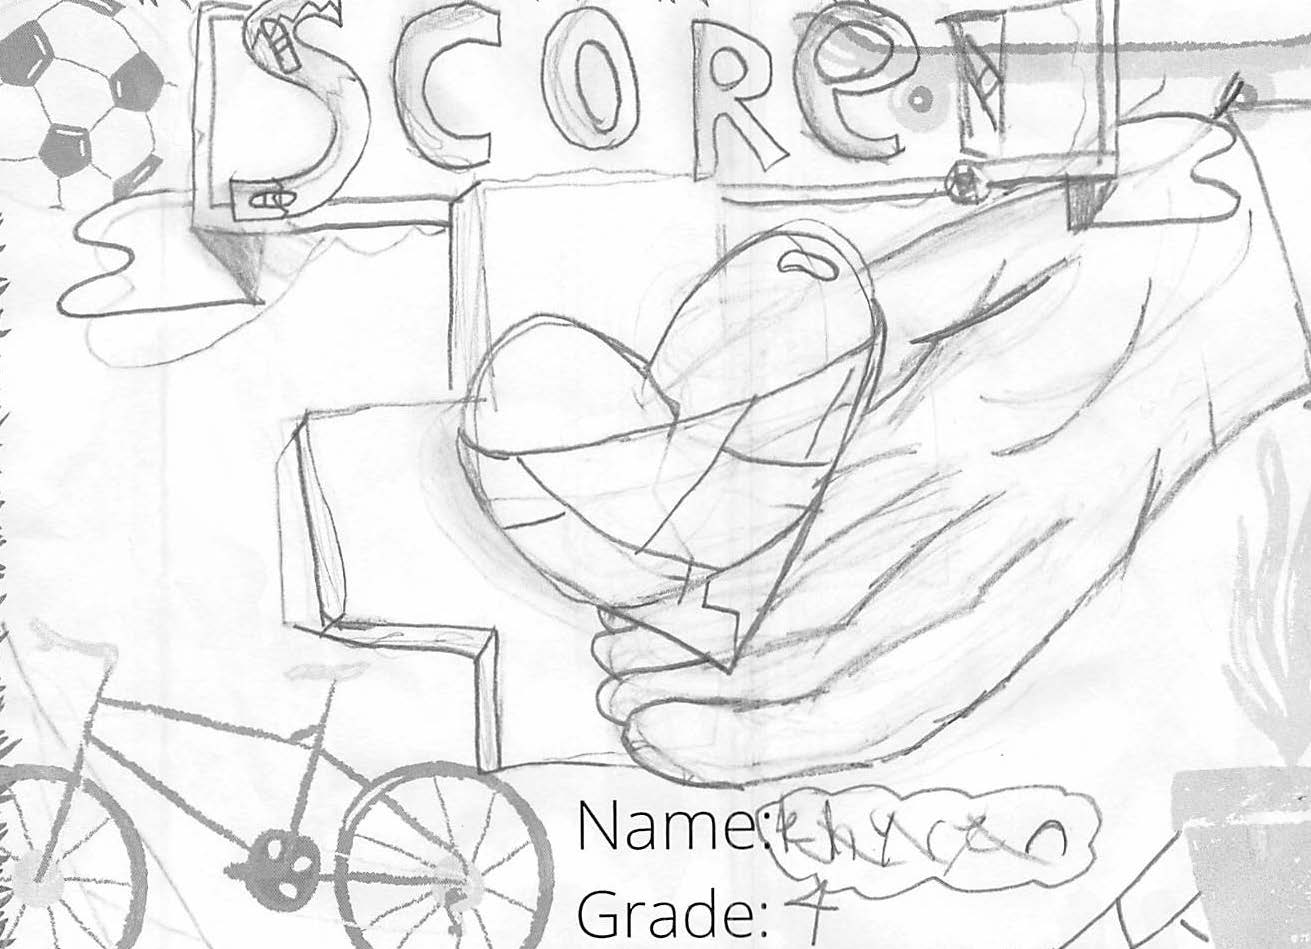 Pencil drawing for the SCORE! logo contest. There is a hand holding a heart below the word: Score.